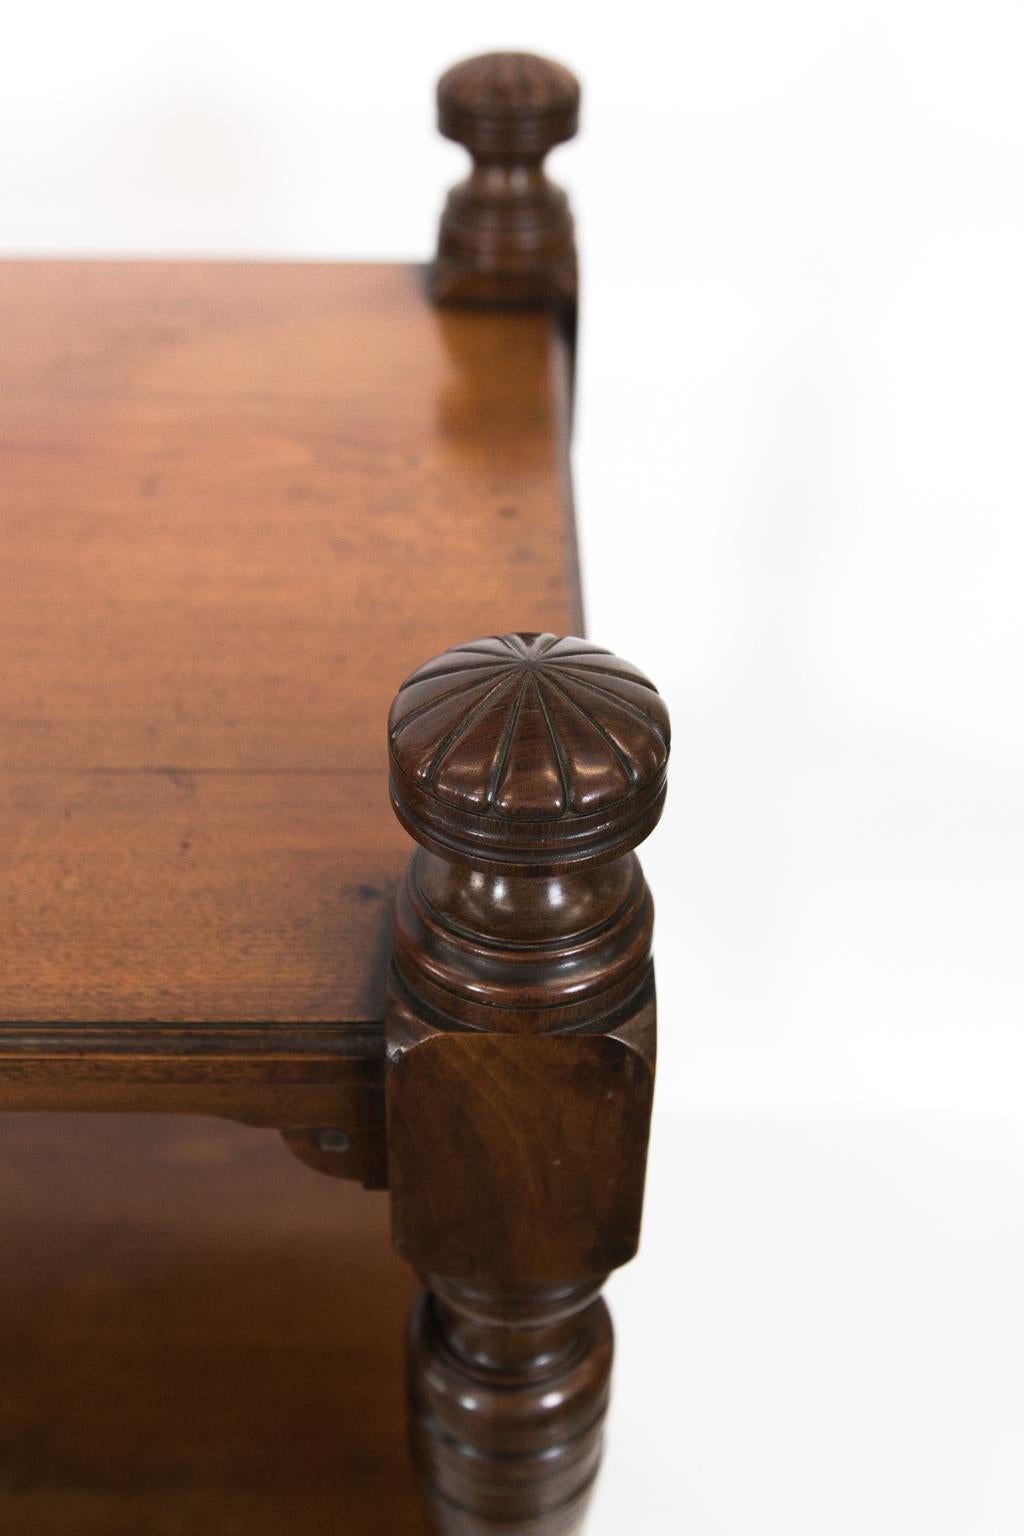 English carved walnut three-tier shelf, with the mushroom finials having carved sunbursts on top. There are aprons on each shelf with carved edge molding. All four legs are very nicely turned and are three inches in diameter. The side legs have